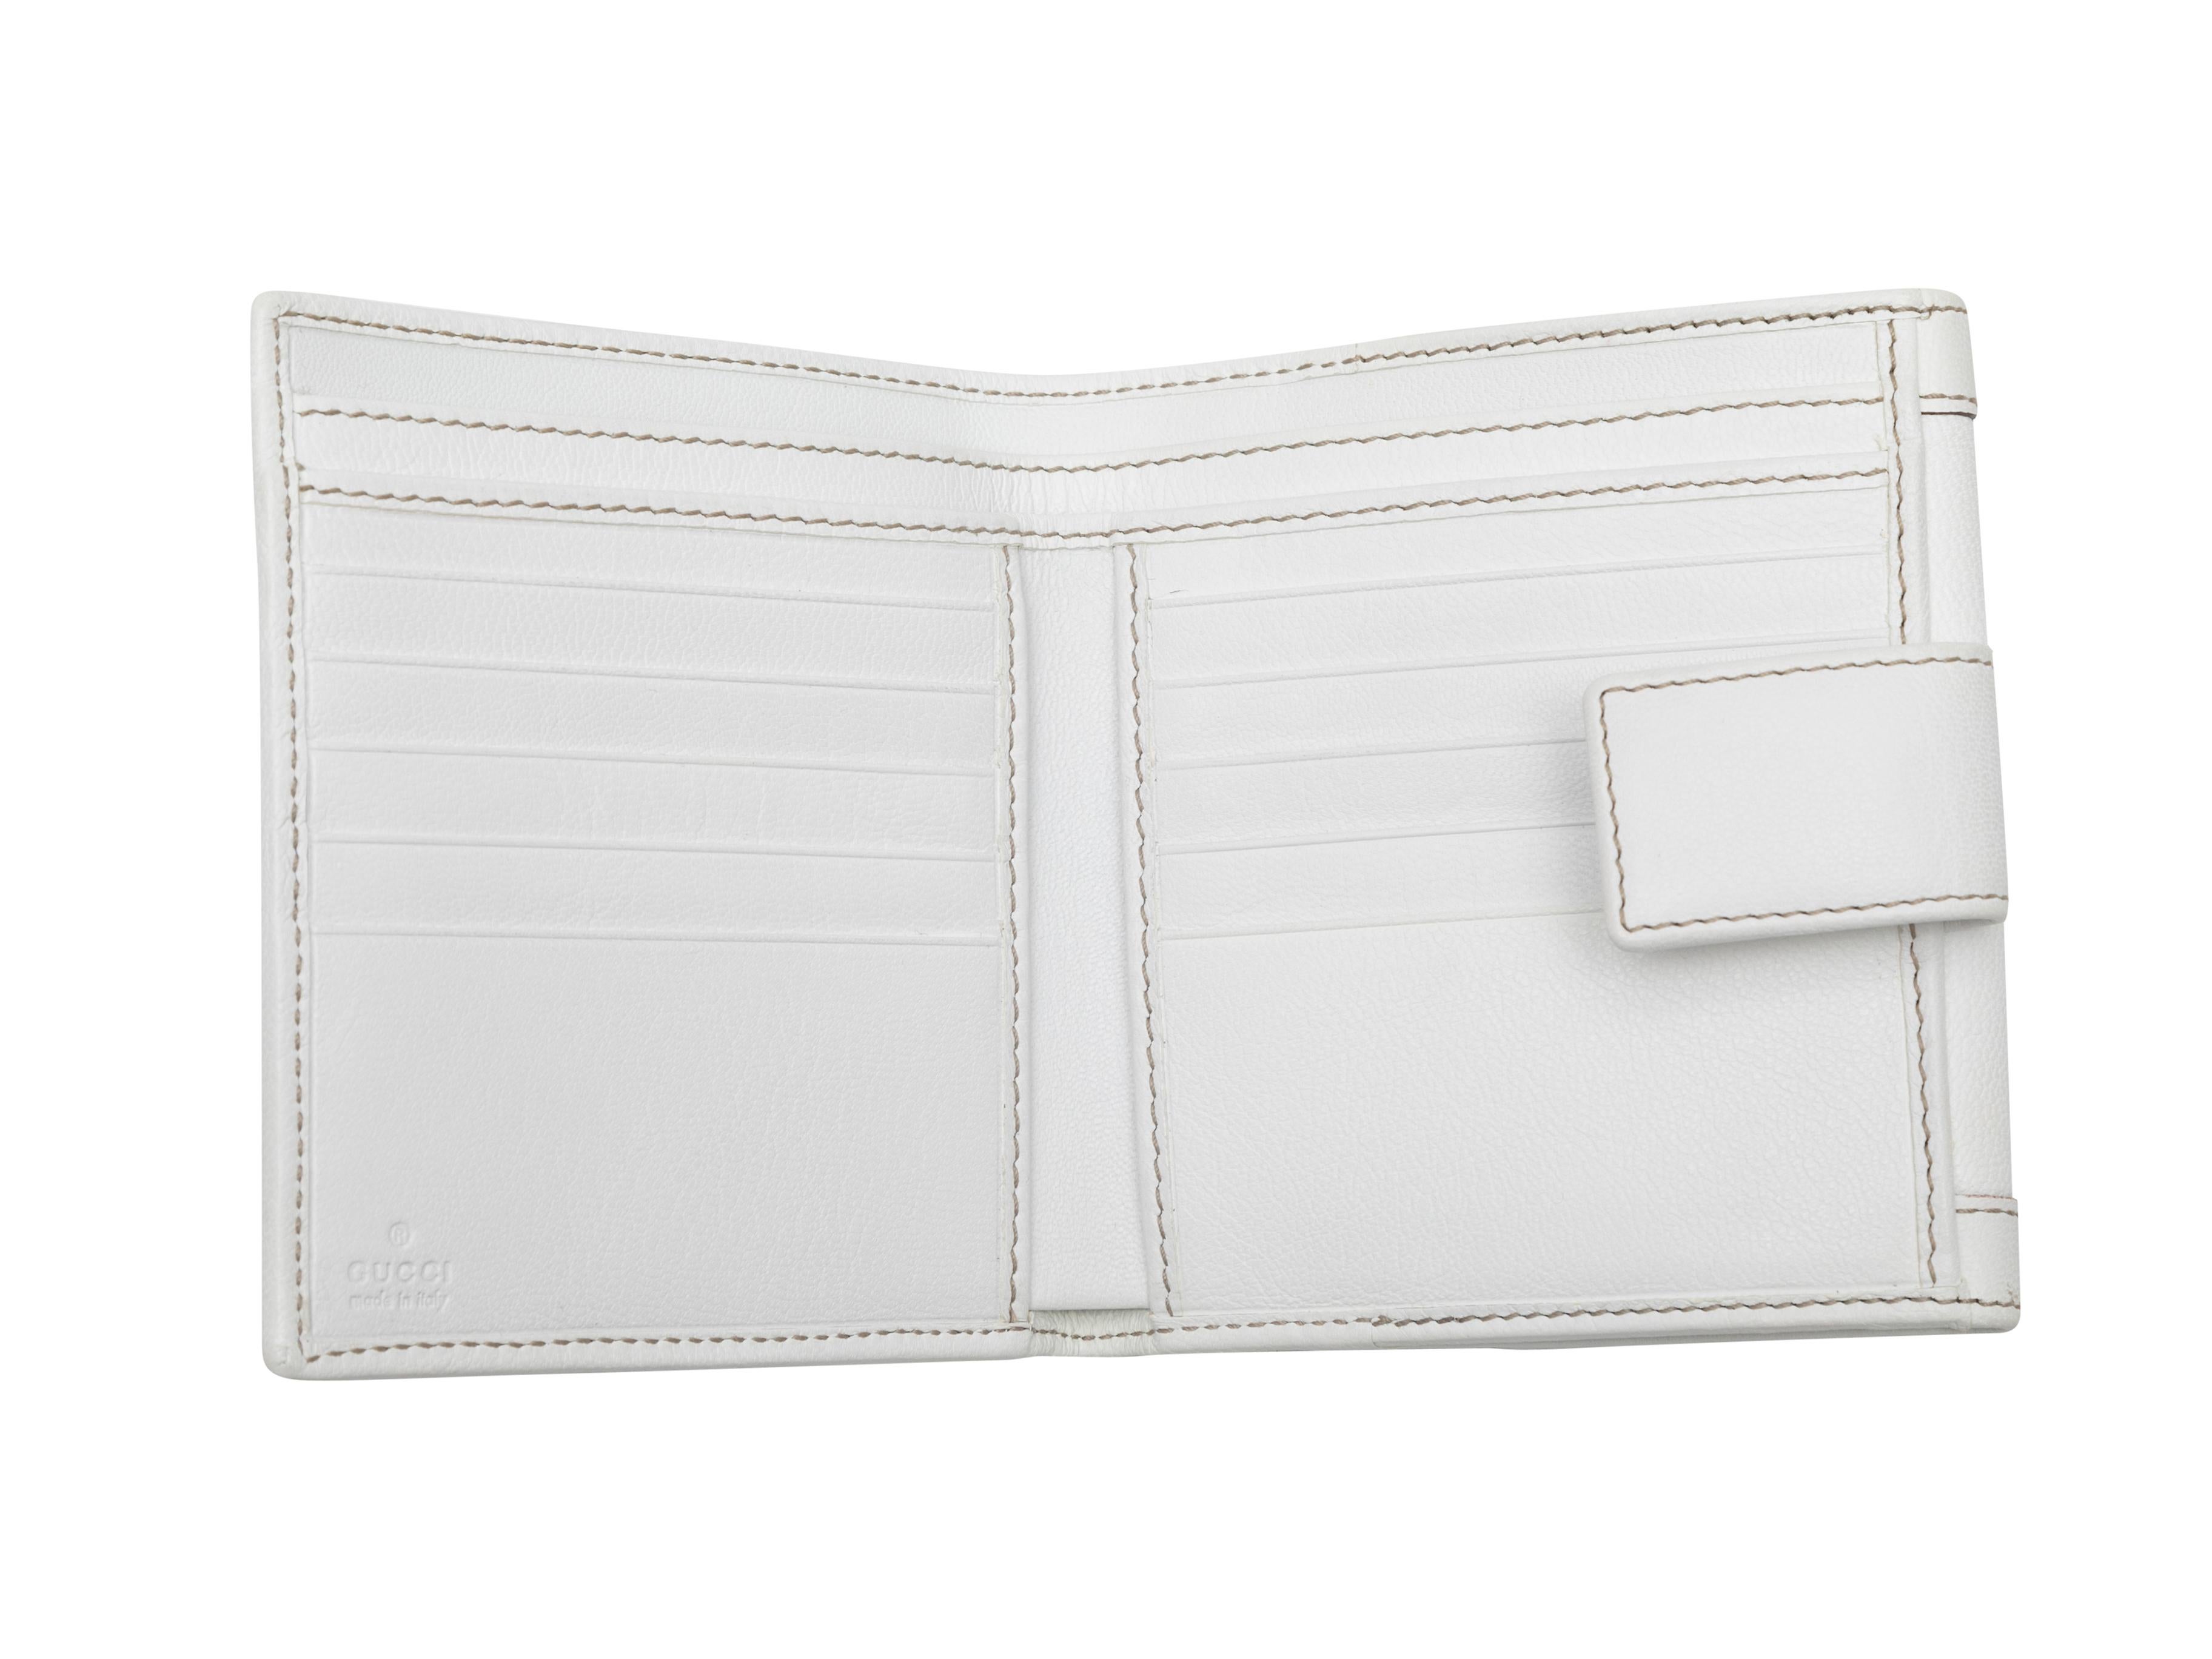 White Gucci Leather Web-Trimmed Wallet In Good Condition For Sale In New York, NY